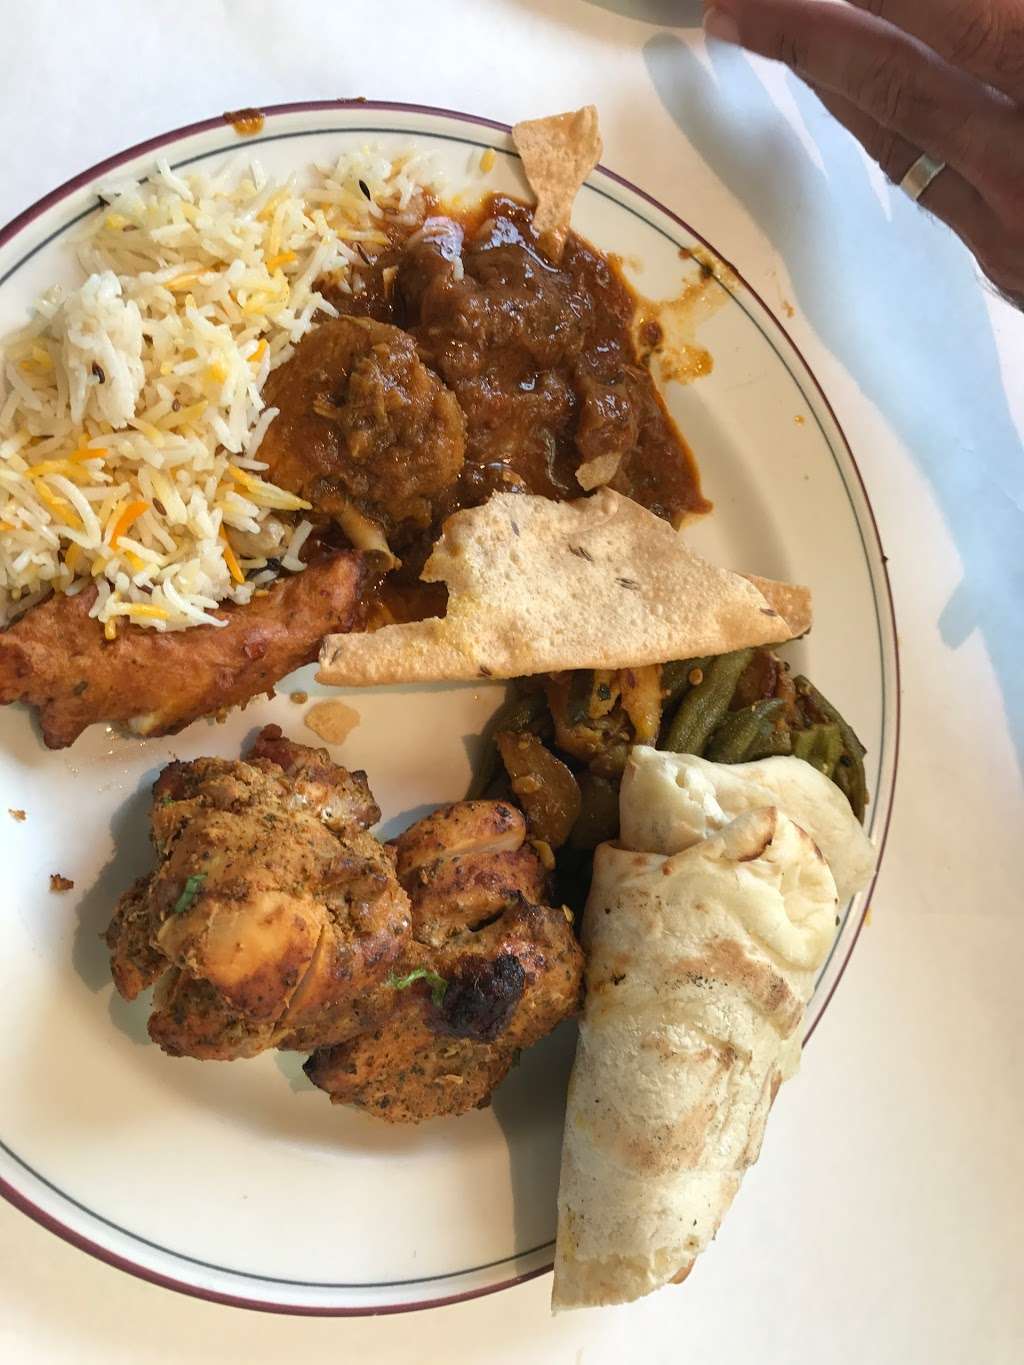 Gaylord Fine Indian Cuisine | 555 Mall Dr, Schaumburg, IL 60173 | Phone: (847) 619-3300